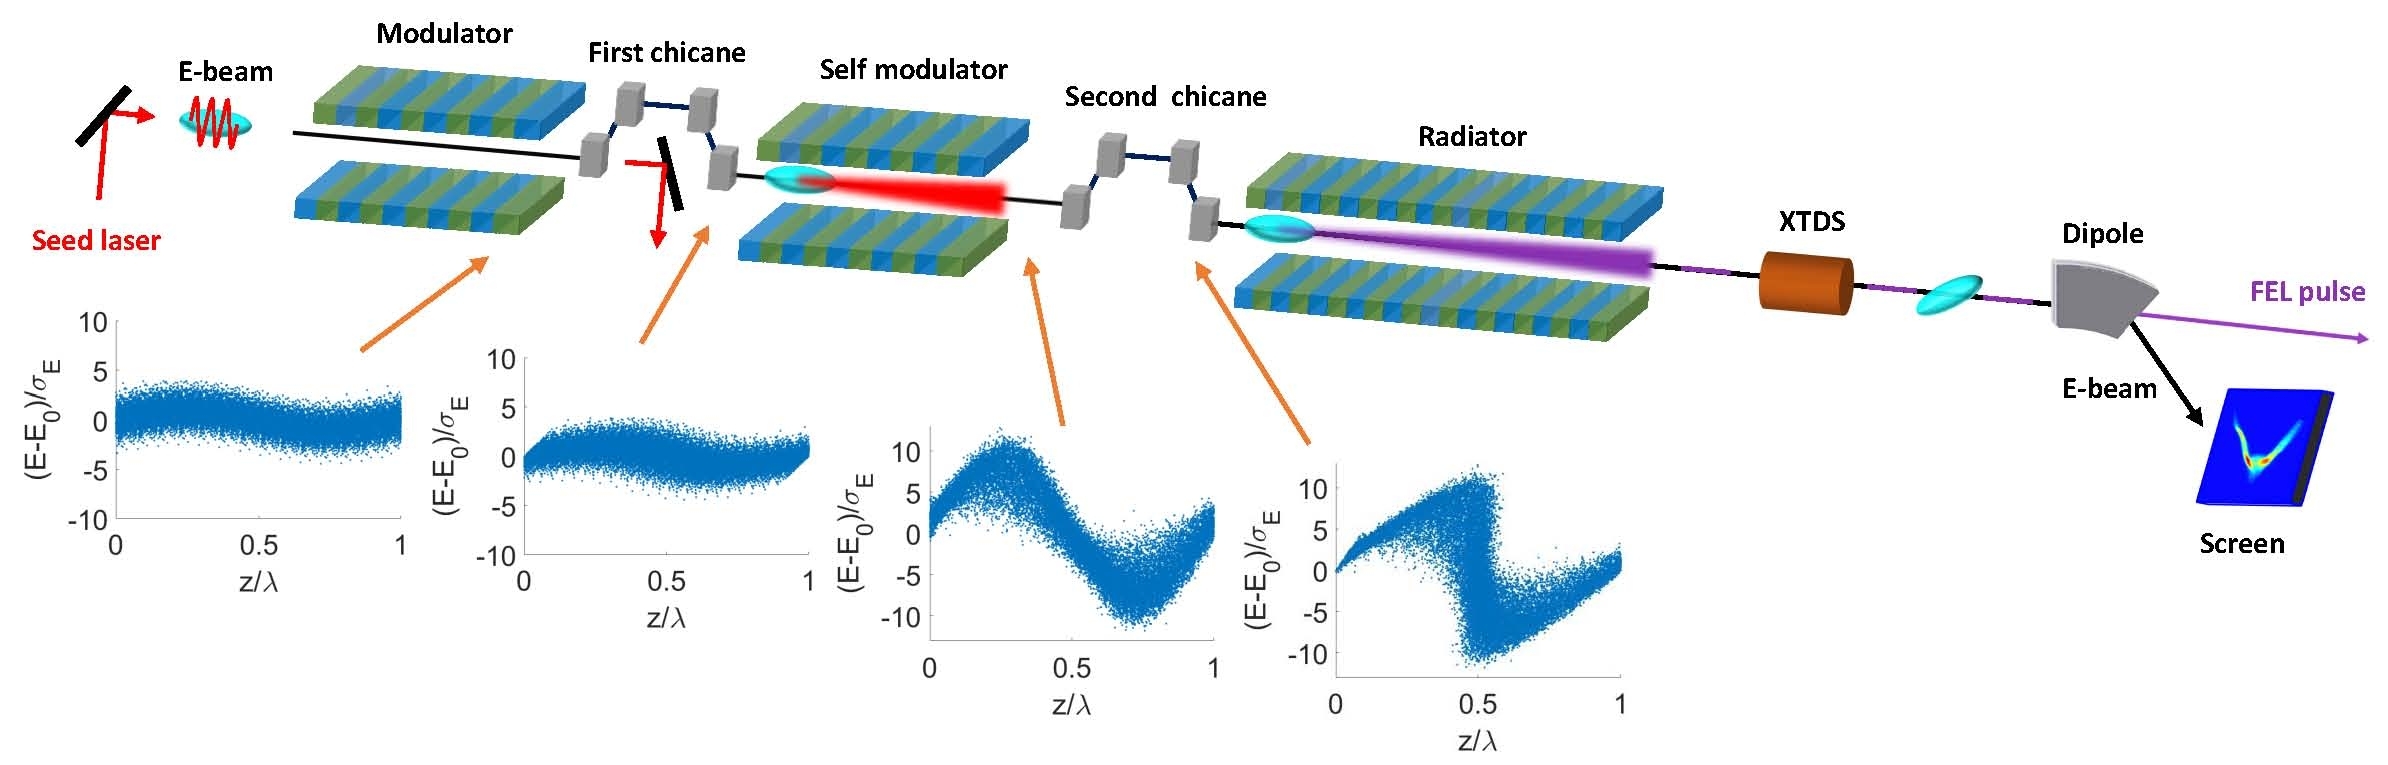 Scientists Propose Novel Self-modulation Scheme in Seeded Free-Electron Lasers